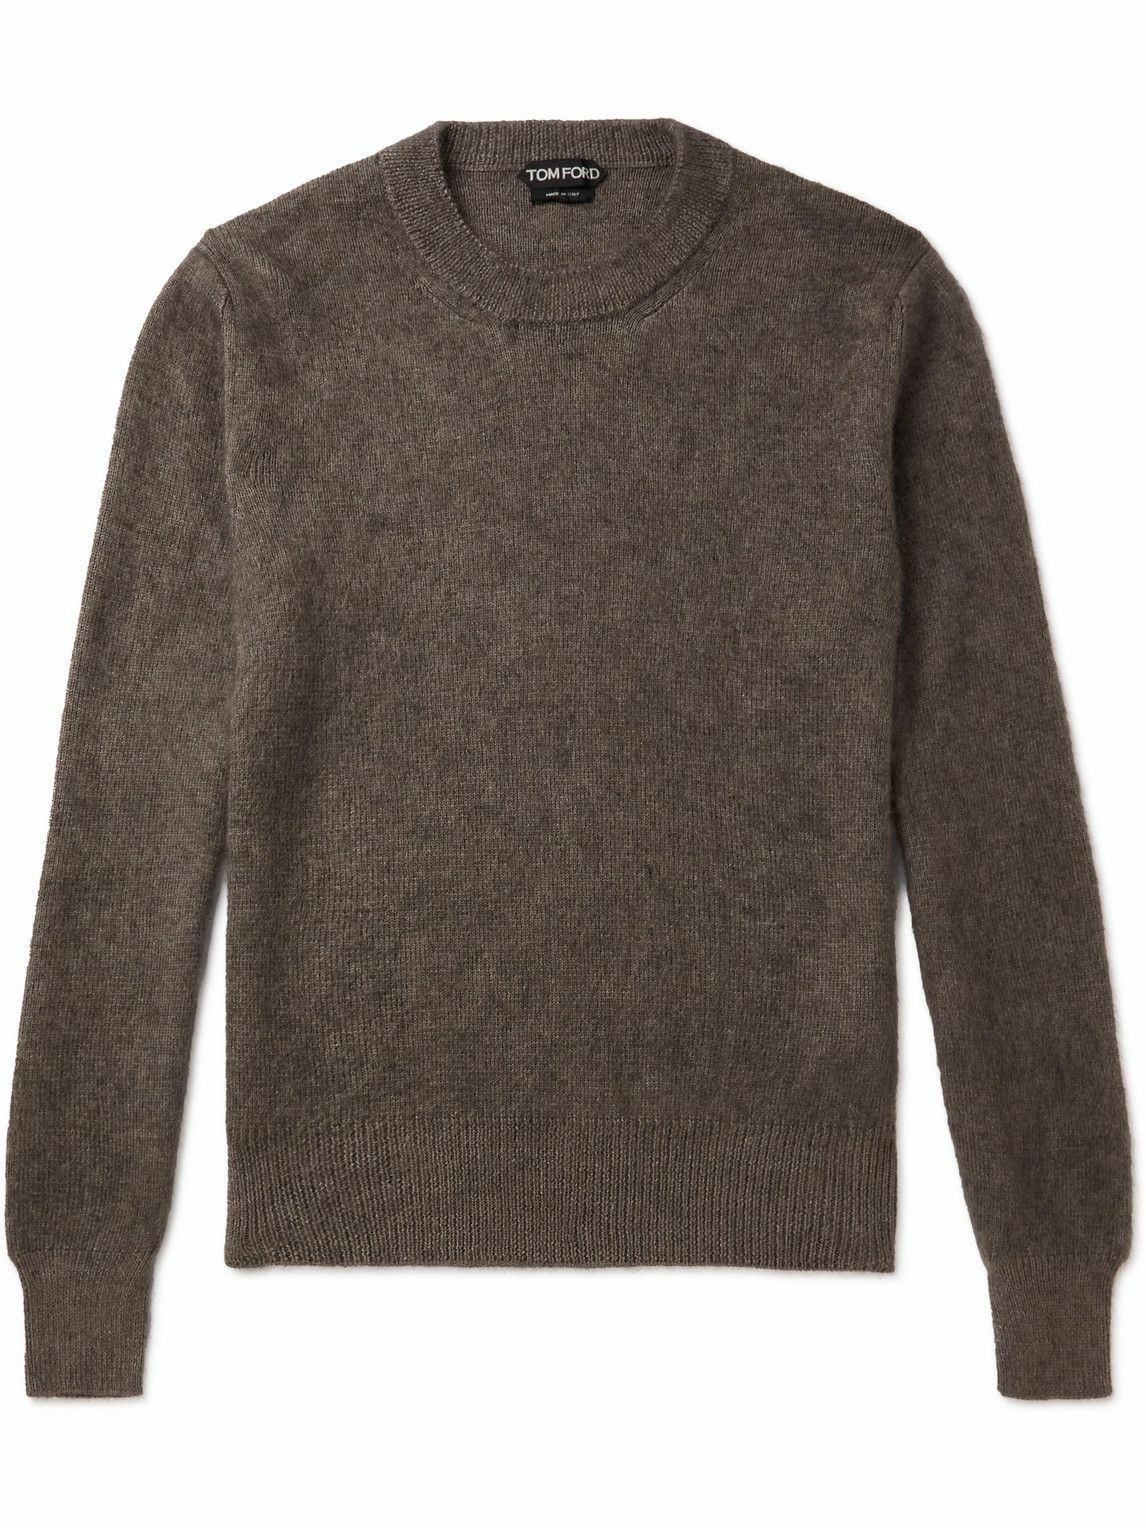 TOM FORD - Wool, Mohair and Silk-Blend Sweater - Brown TOM FORD